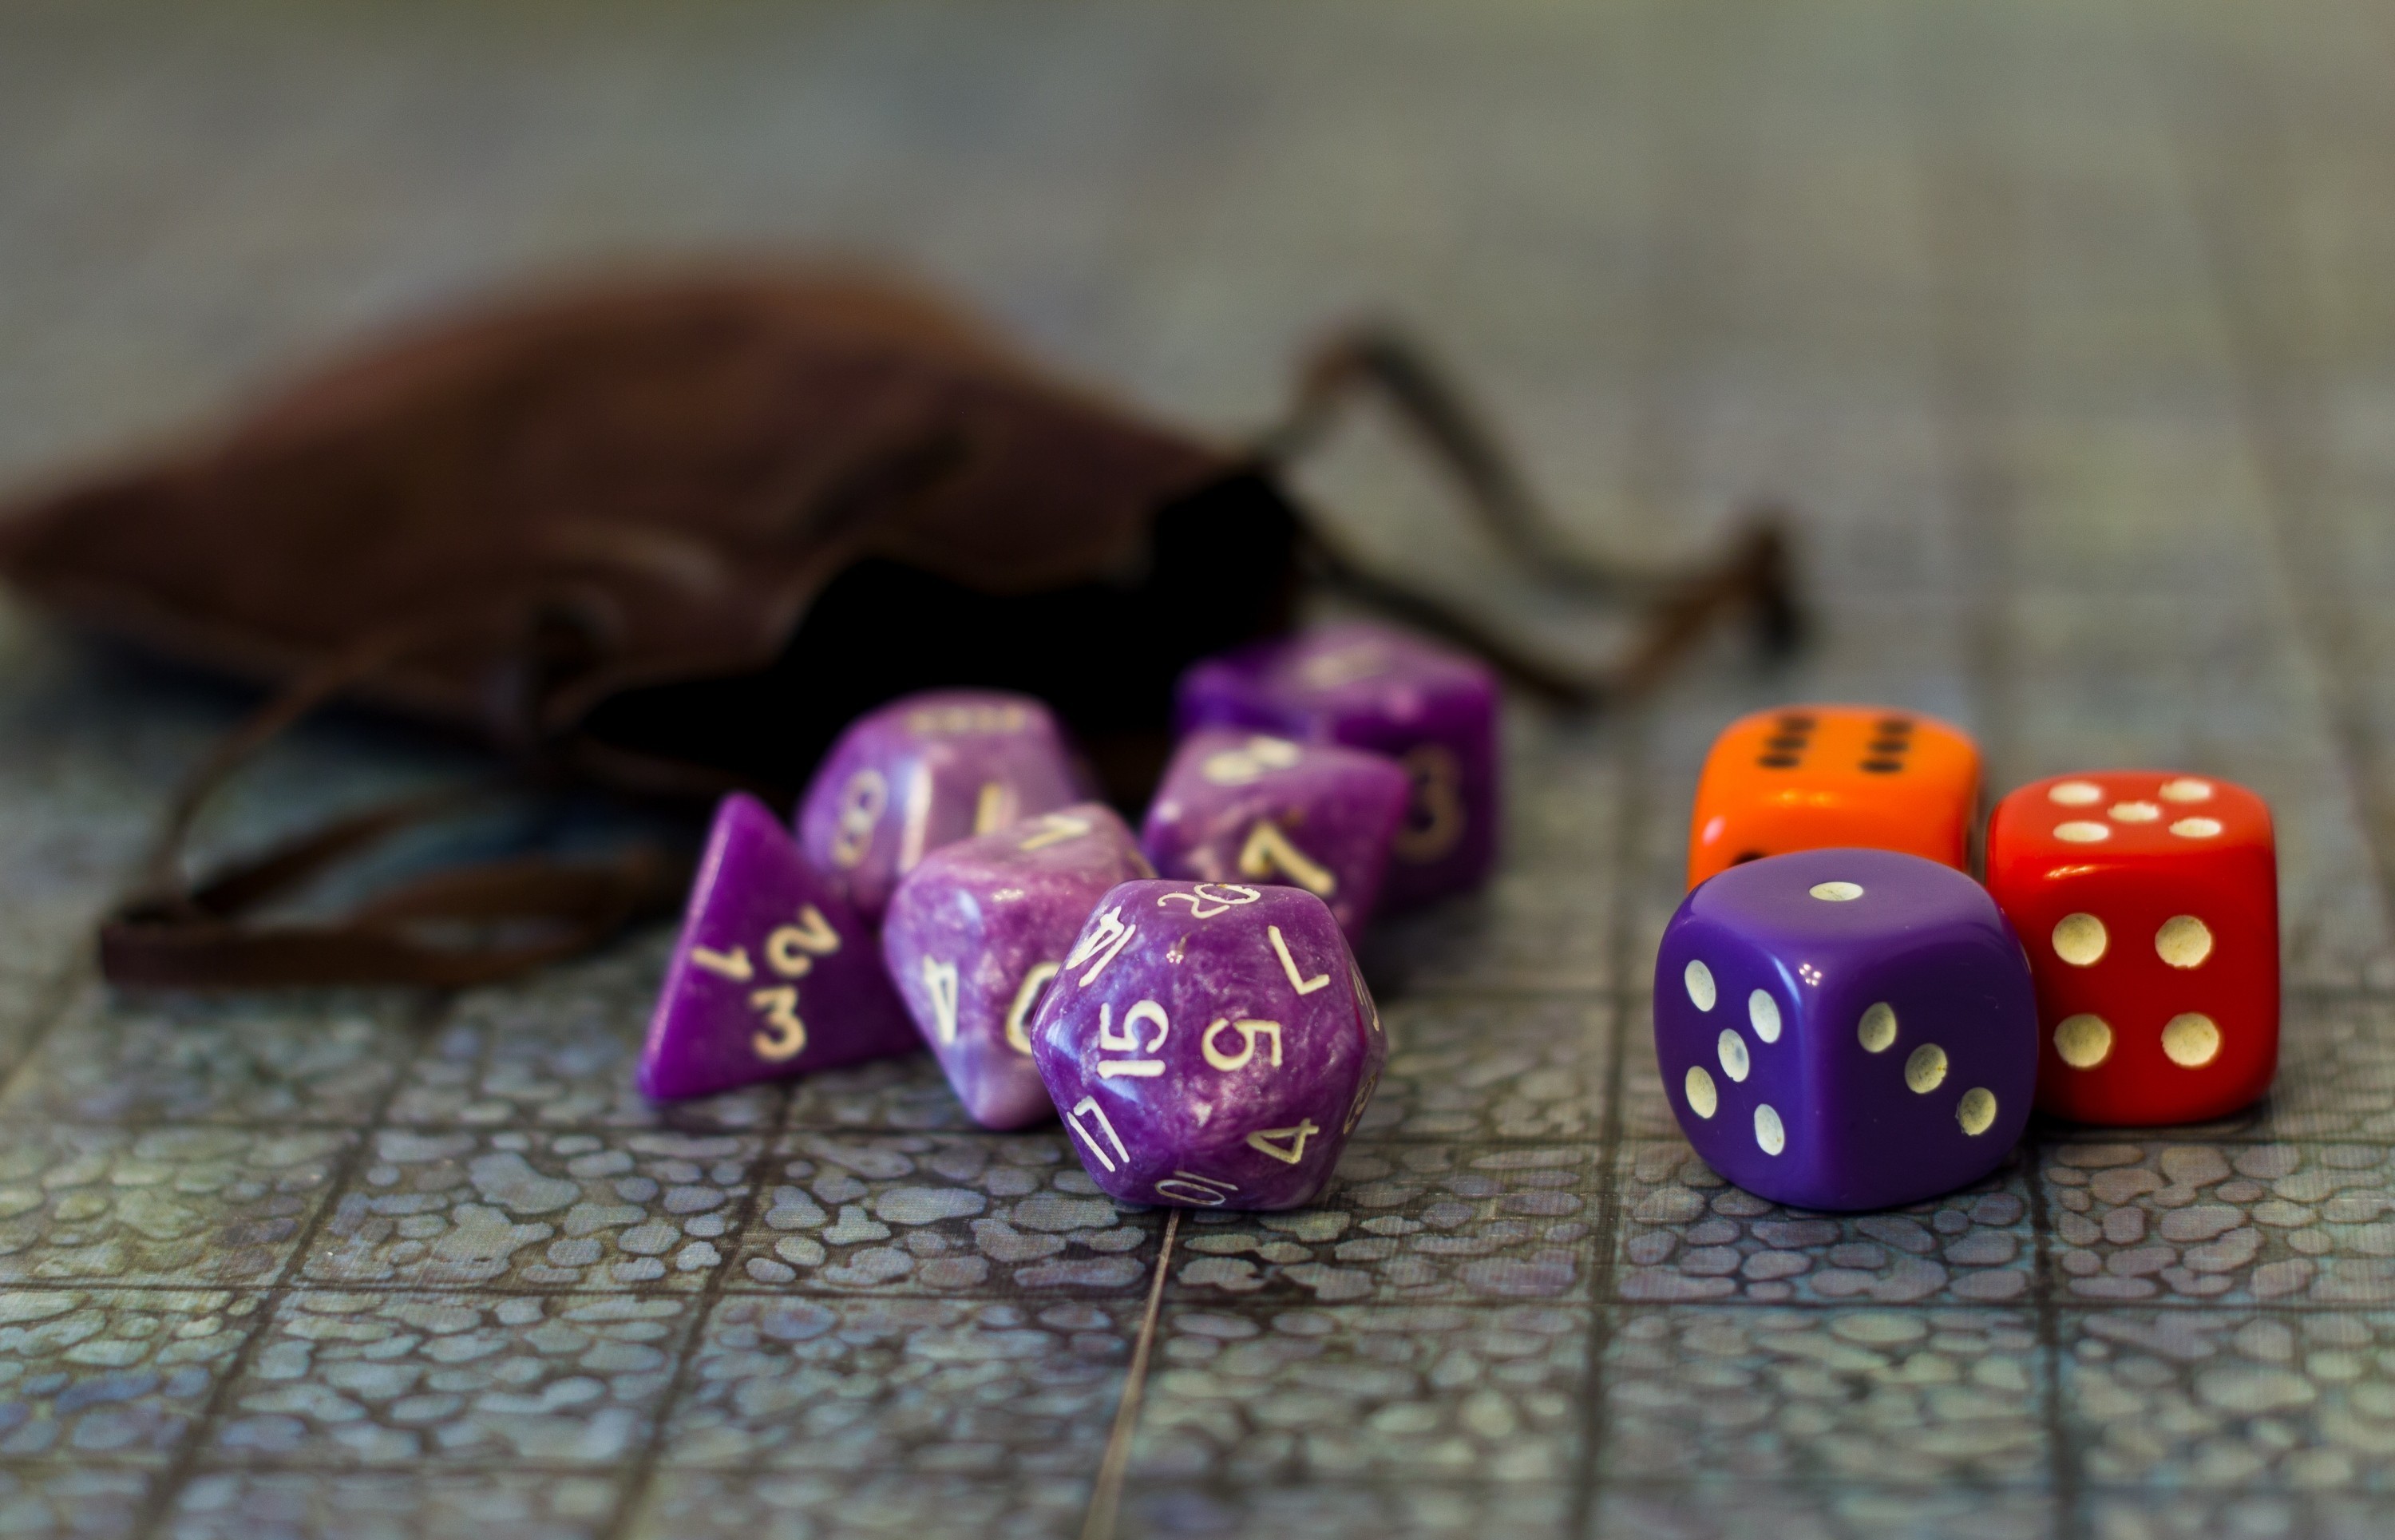 Dnd Dice Fabric Wallpaper and Home Decor  Spoonflower